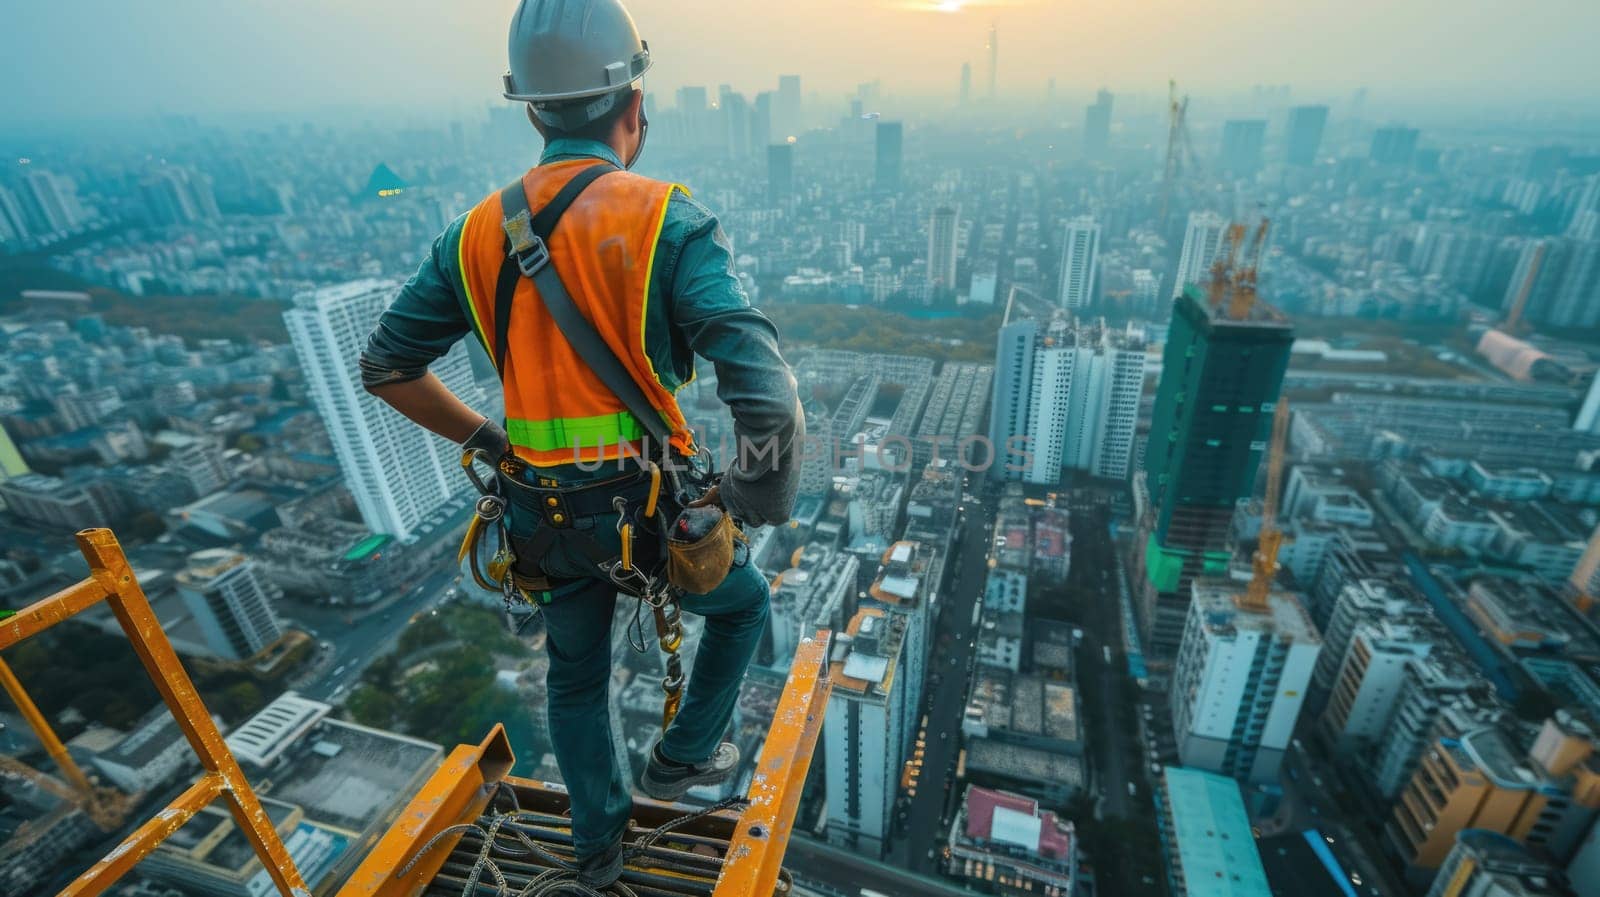 A construction worker stands atop a skyscraper, surrounded by the mesmerizing city landscape, under a cloudy sky with water glittering in the distance. AIG41